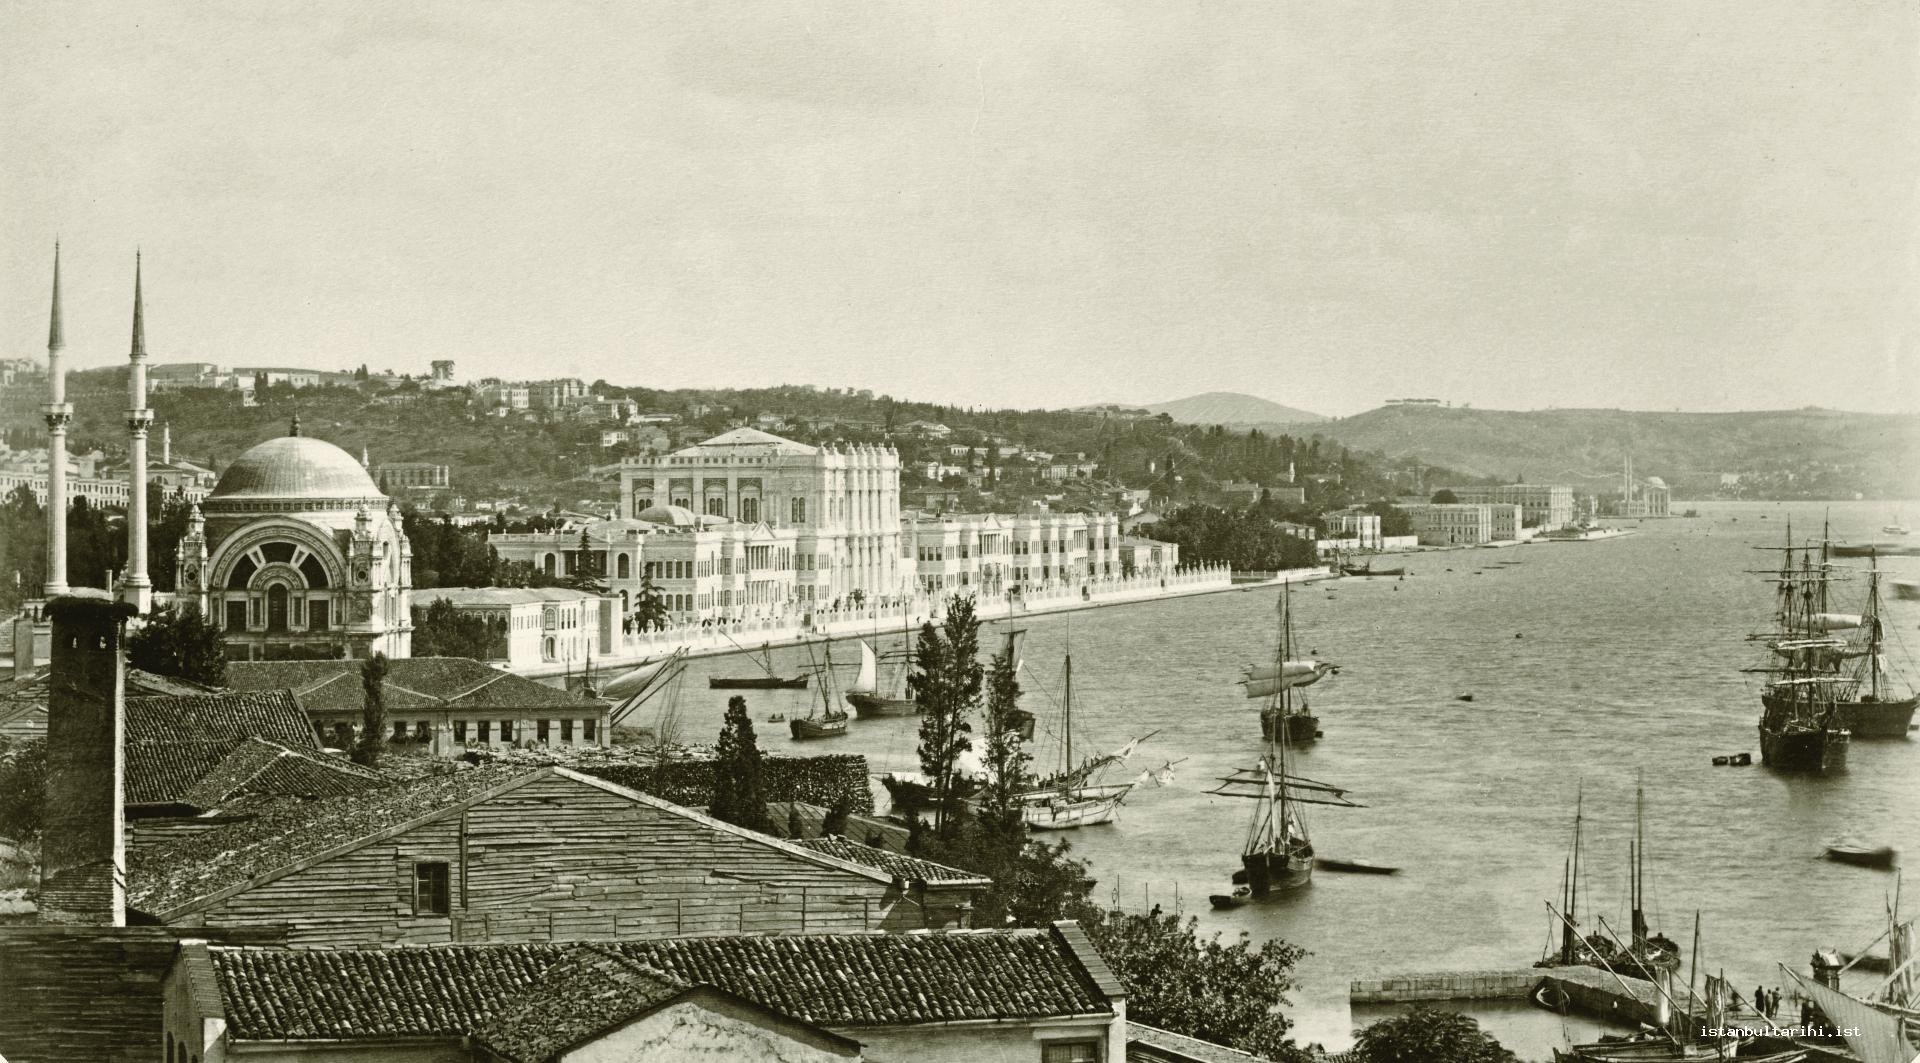 12- There were wooden houses and shops along the coast from Fındıklı to Dolmabahçe. Behind Dolmabahçe Palace and Mosque was empty.  There was neither a stadium nor skyscrapers. In place of them, there were imperial stable and theatre building when this picture was taken.